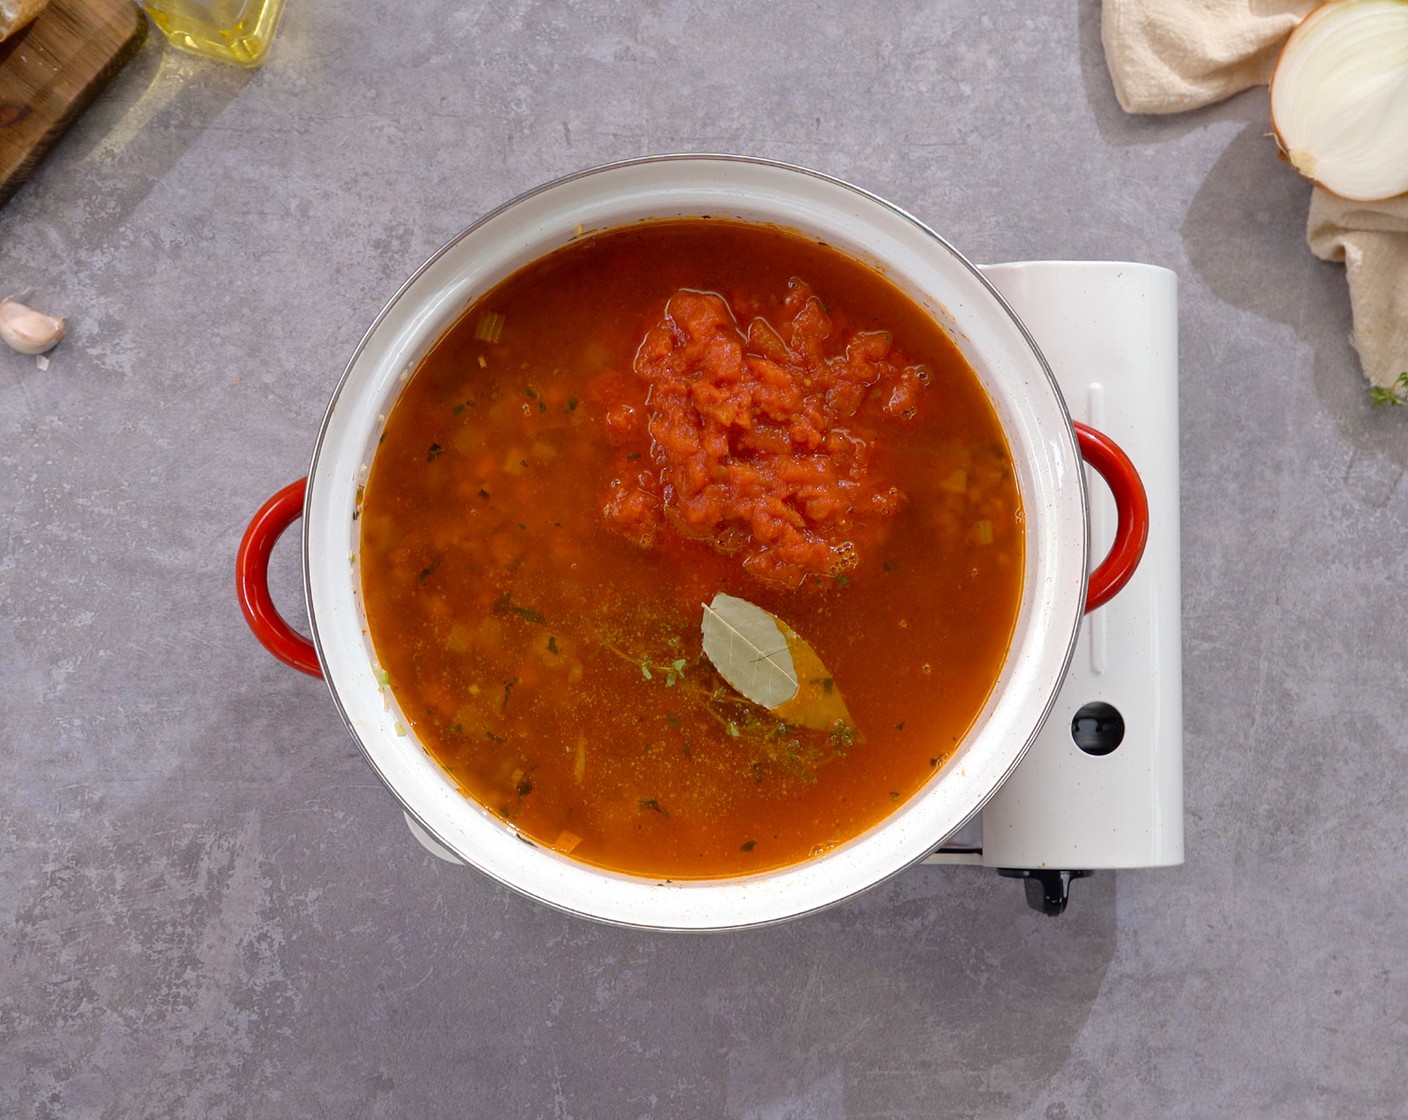 step 5 Add Diced Tomatoes (1 can), Vegetable Broth (4 cups), Fresh Thyme (1 sprig), Bay Leaf (1), and Tabasco® Original Red Pepper Sauce (1 tsp). Bring to a simmer and cook for about 10 minutes. Season with Salt (3/4 tsp) and Ground Black Pepper (1/2 tsp).